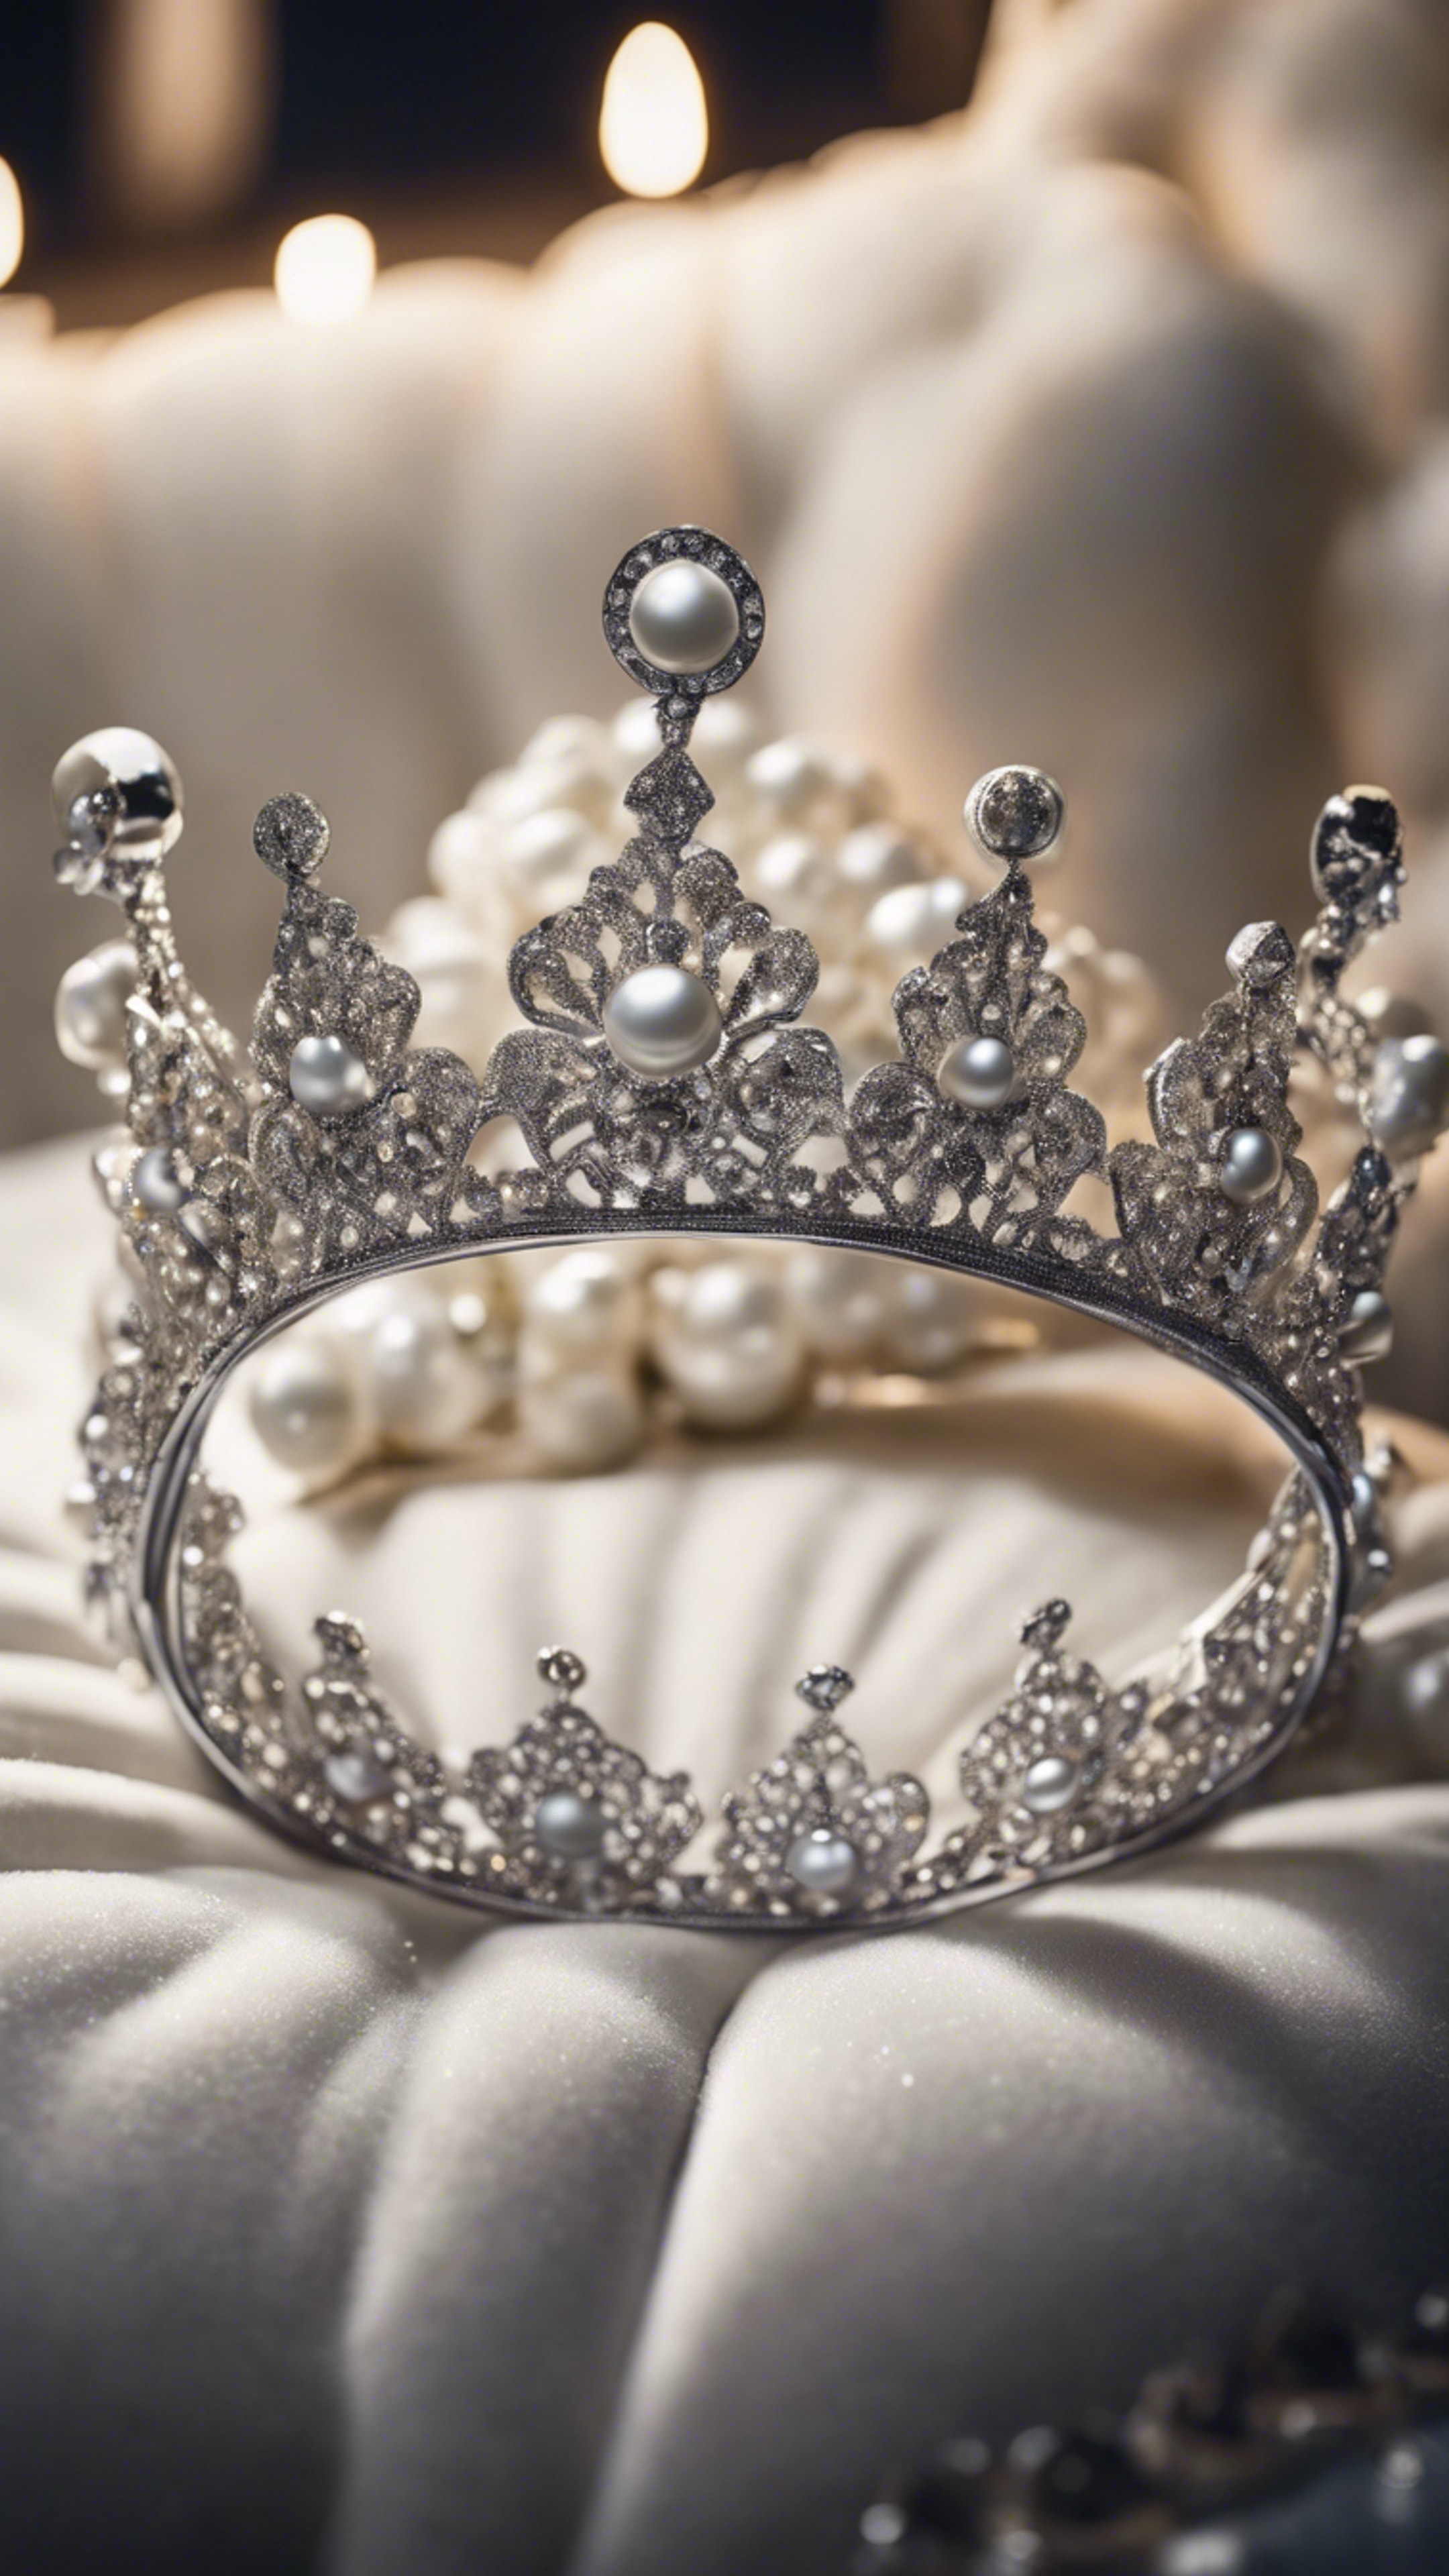 A classic silver crown embellished with pearls and diamonds lying on a white velvet cushion at night. Sfondo[f90278dd6b1c4e9ca8cc]